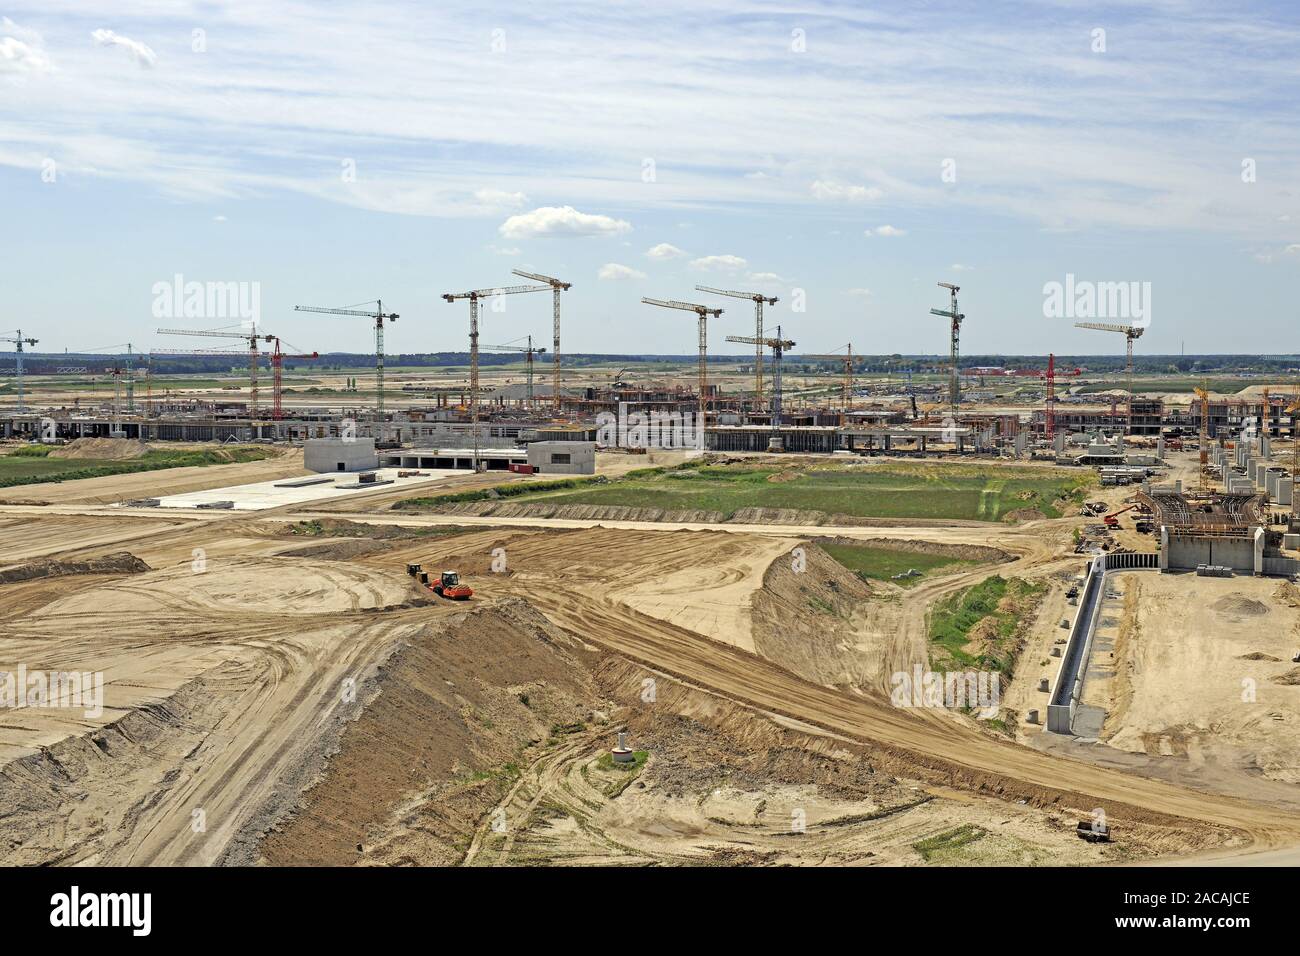 Page 2 - Berlin Schoenefeld Airport High Resolution Stock Photography and  Images - Alamy